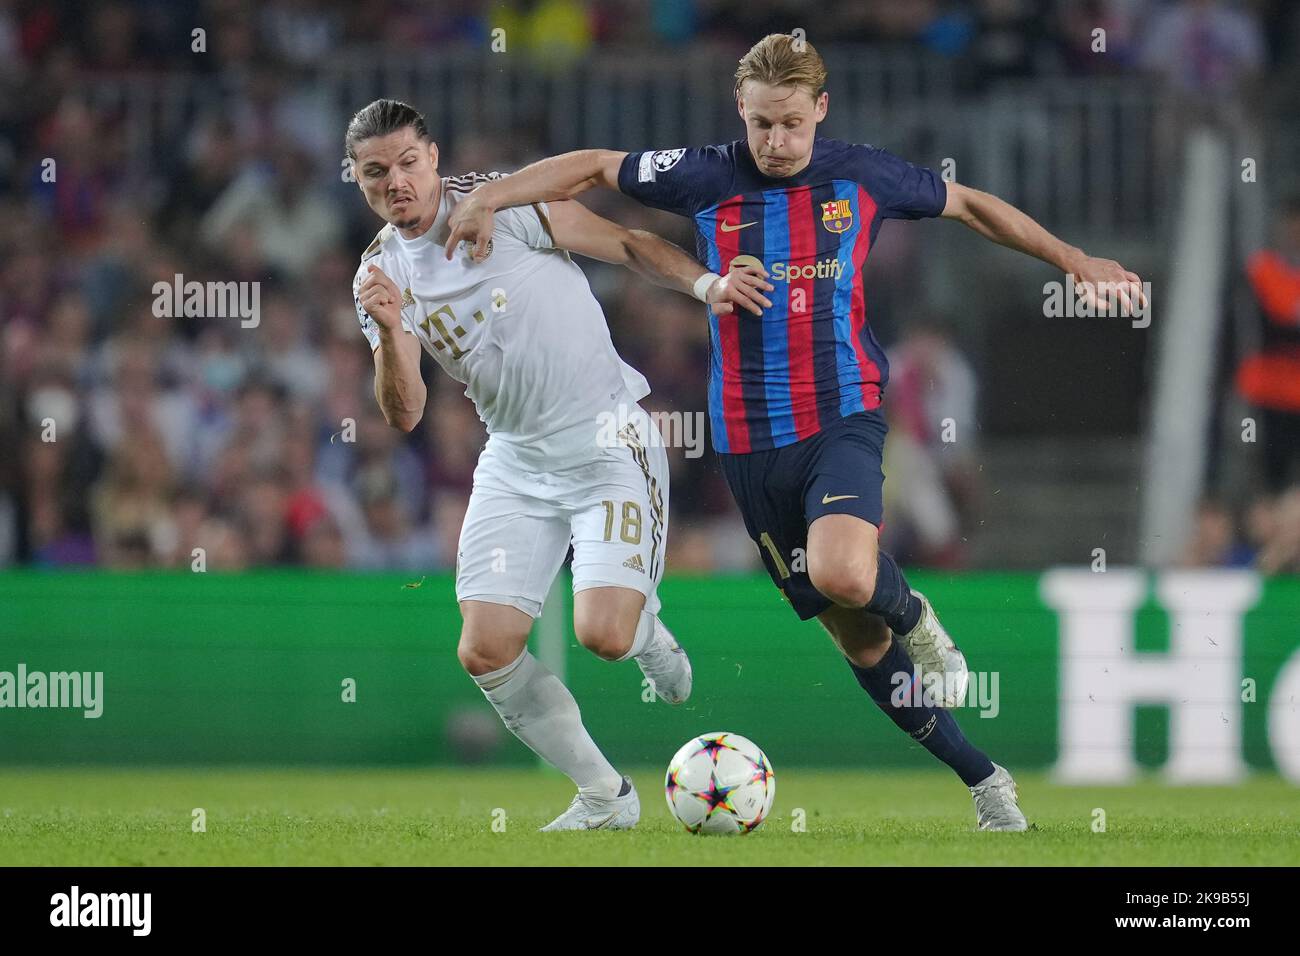 Barcelona, Spain. October 26, 2022, Frenkie de Jong of FC Barcelona and Marcel Sabitzer of FC Bayern Munich during the UEFA Champions League match, group C between FC Barcelona and Bayern Munich played at Spotify Camp Nou Stadium on October 26, 2022 in Barcelona, Spain. (Photo by Bagu Blanco / PRESSIN) Stock Photo